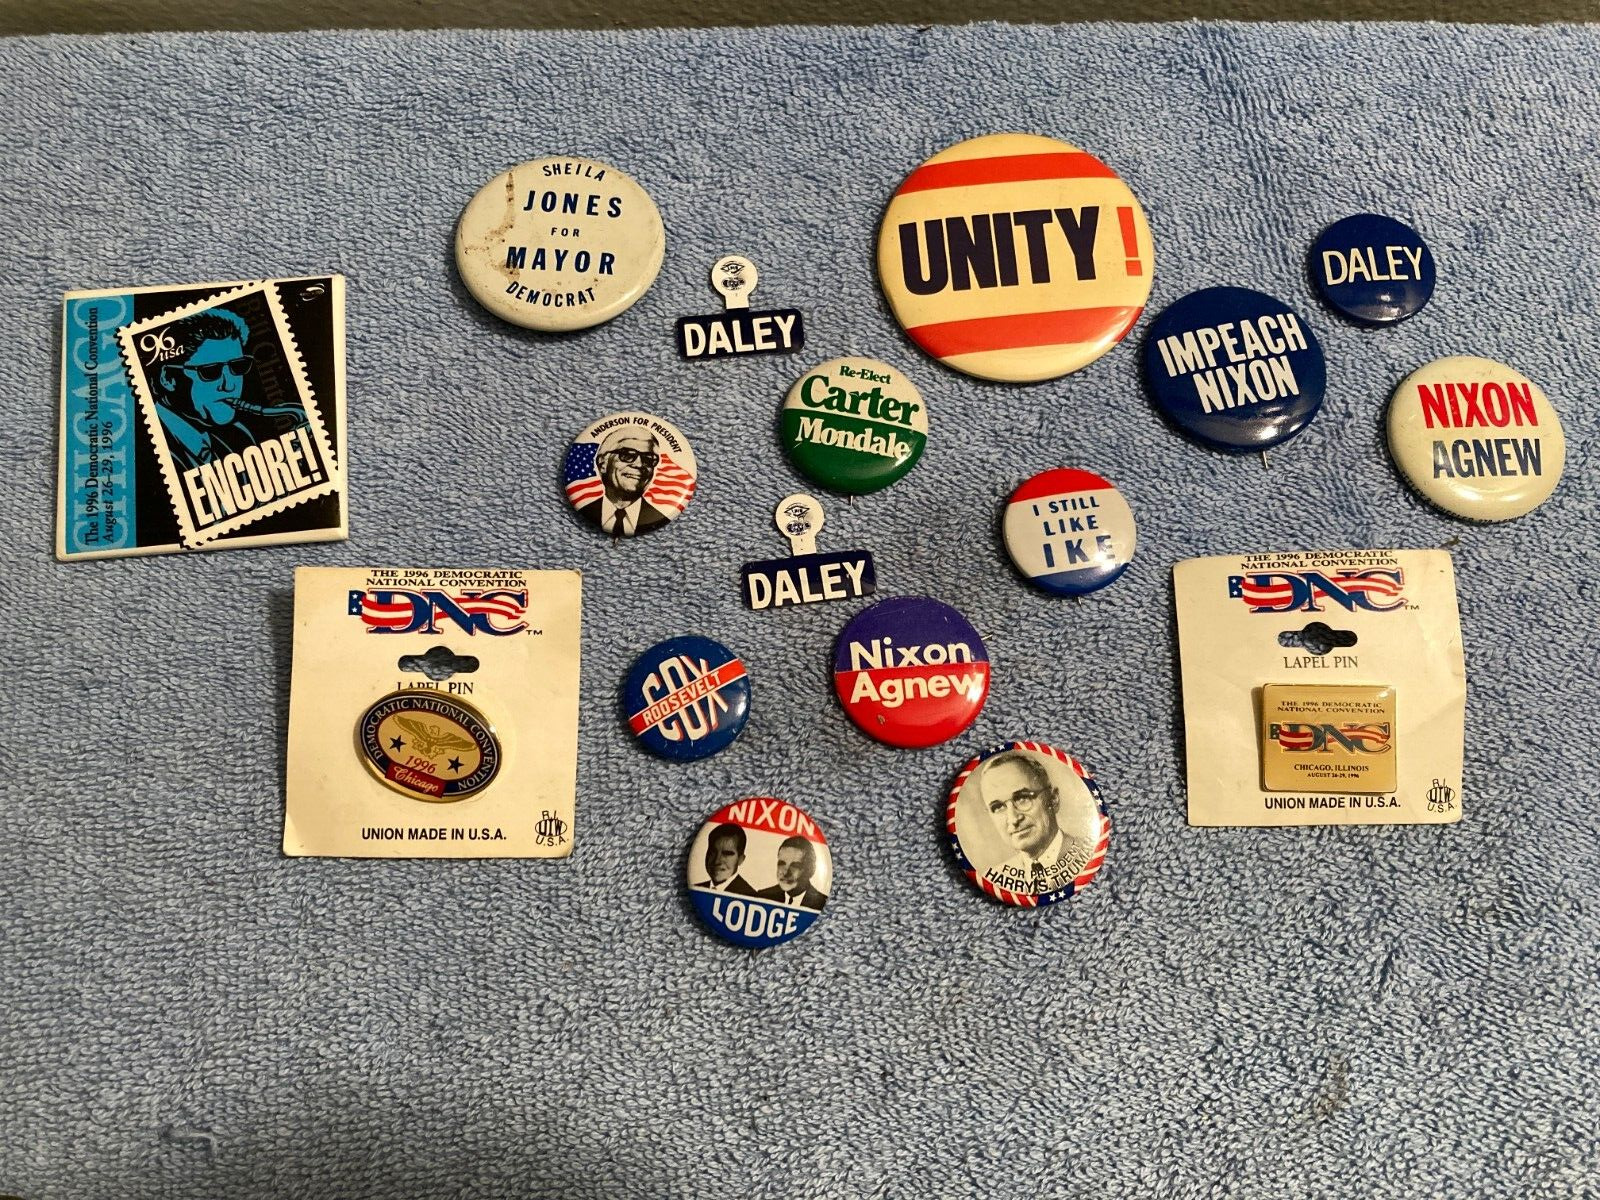 VINTAGE DEMOCRATIC NATIONAL CONVENTION NIXON DALEY POLITICAL PINS & BUTTONS LOT